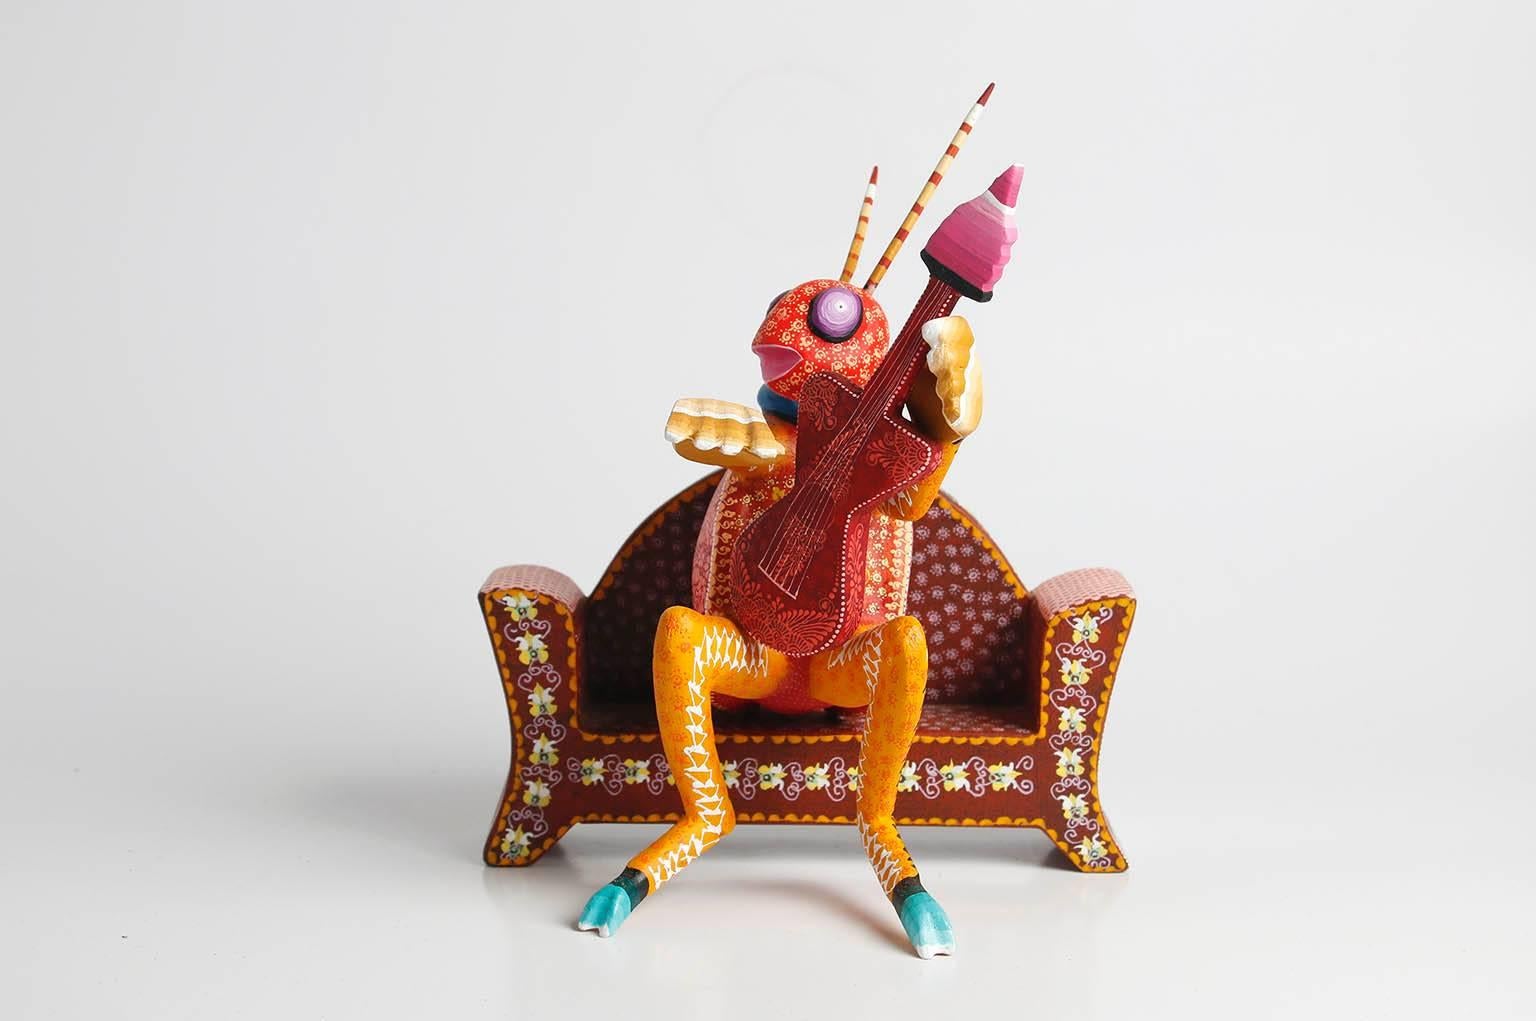 Contemporary 21st Century Set of Seven Hand-Carved Wood Alebrijes Grasshoppers Music Band